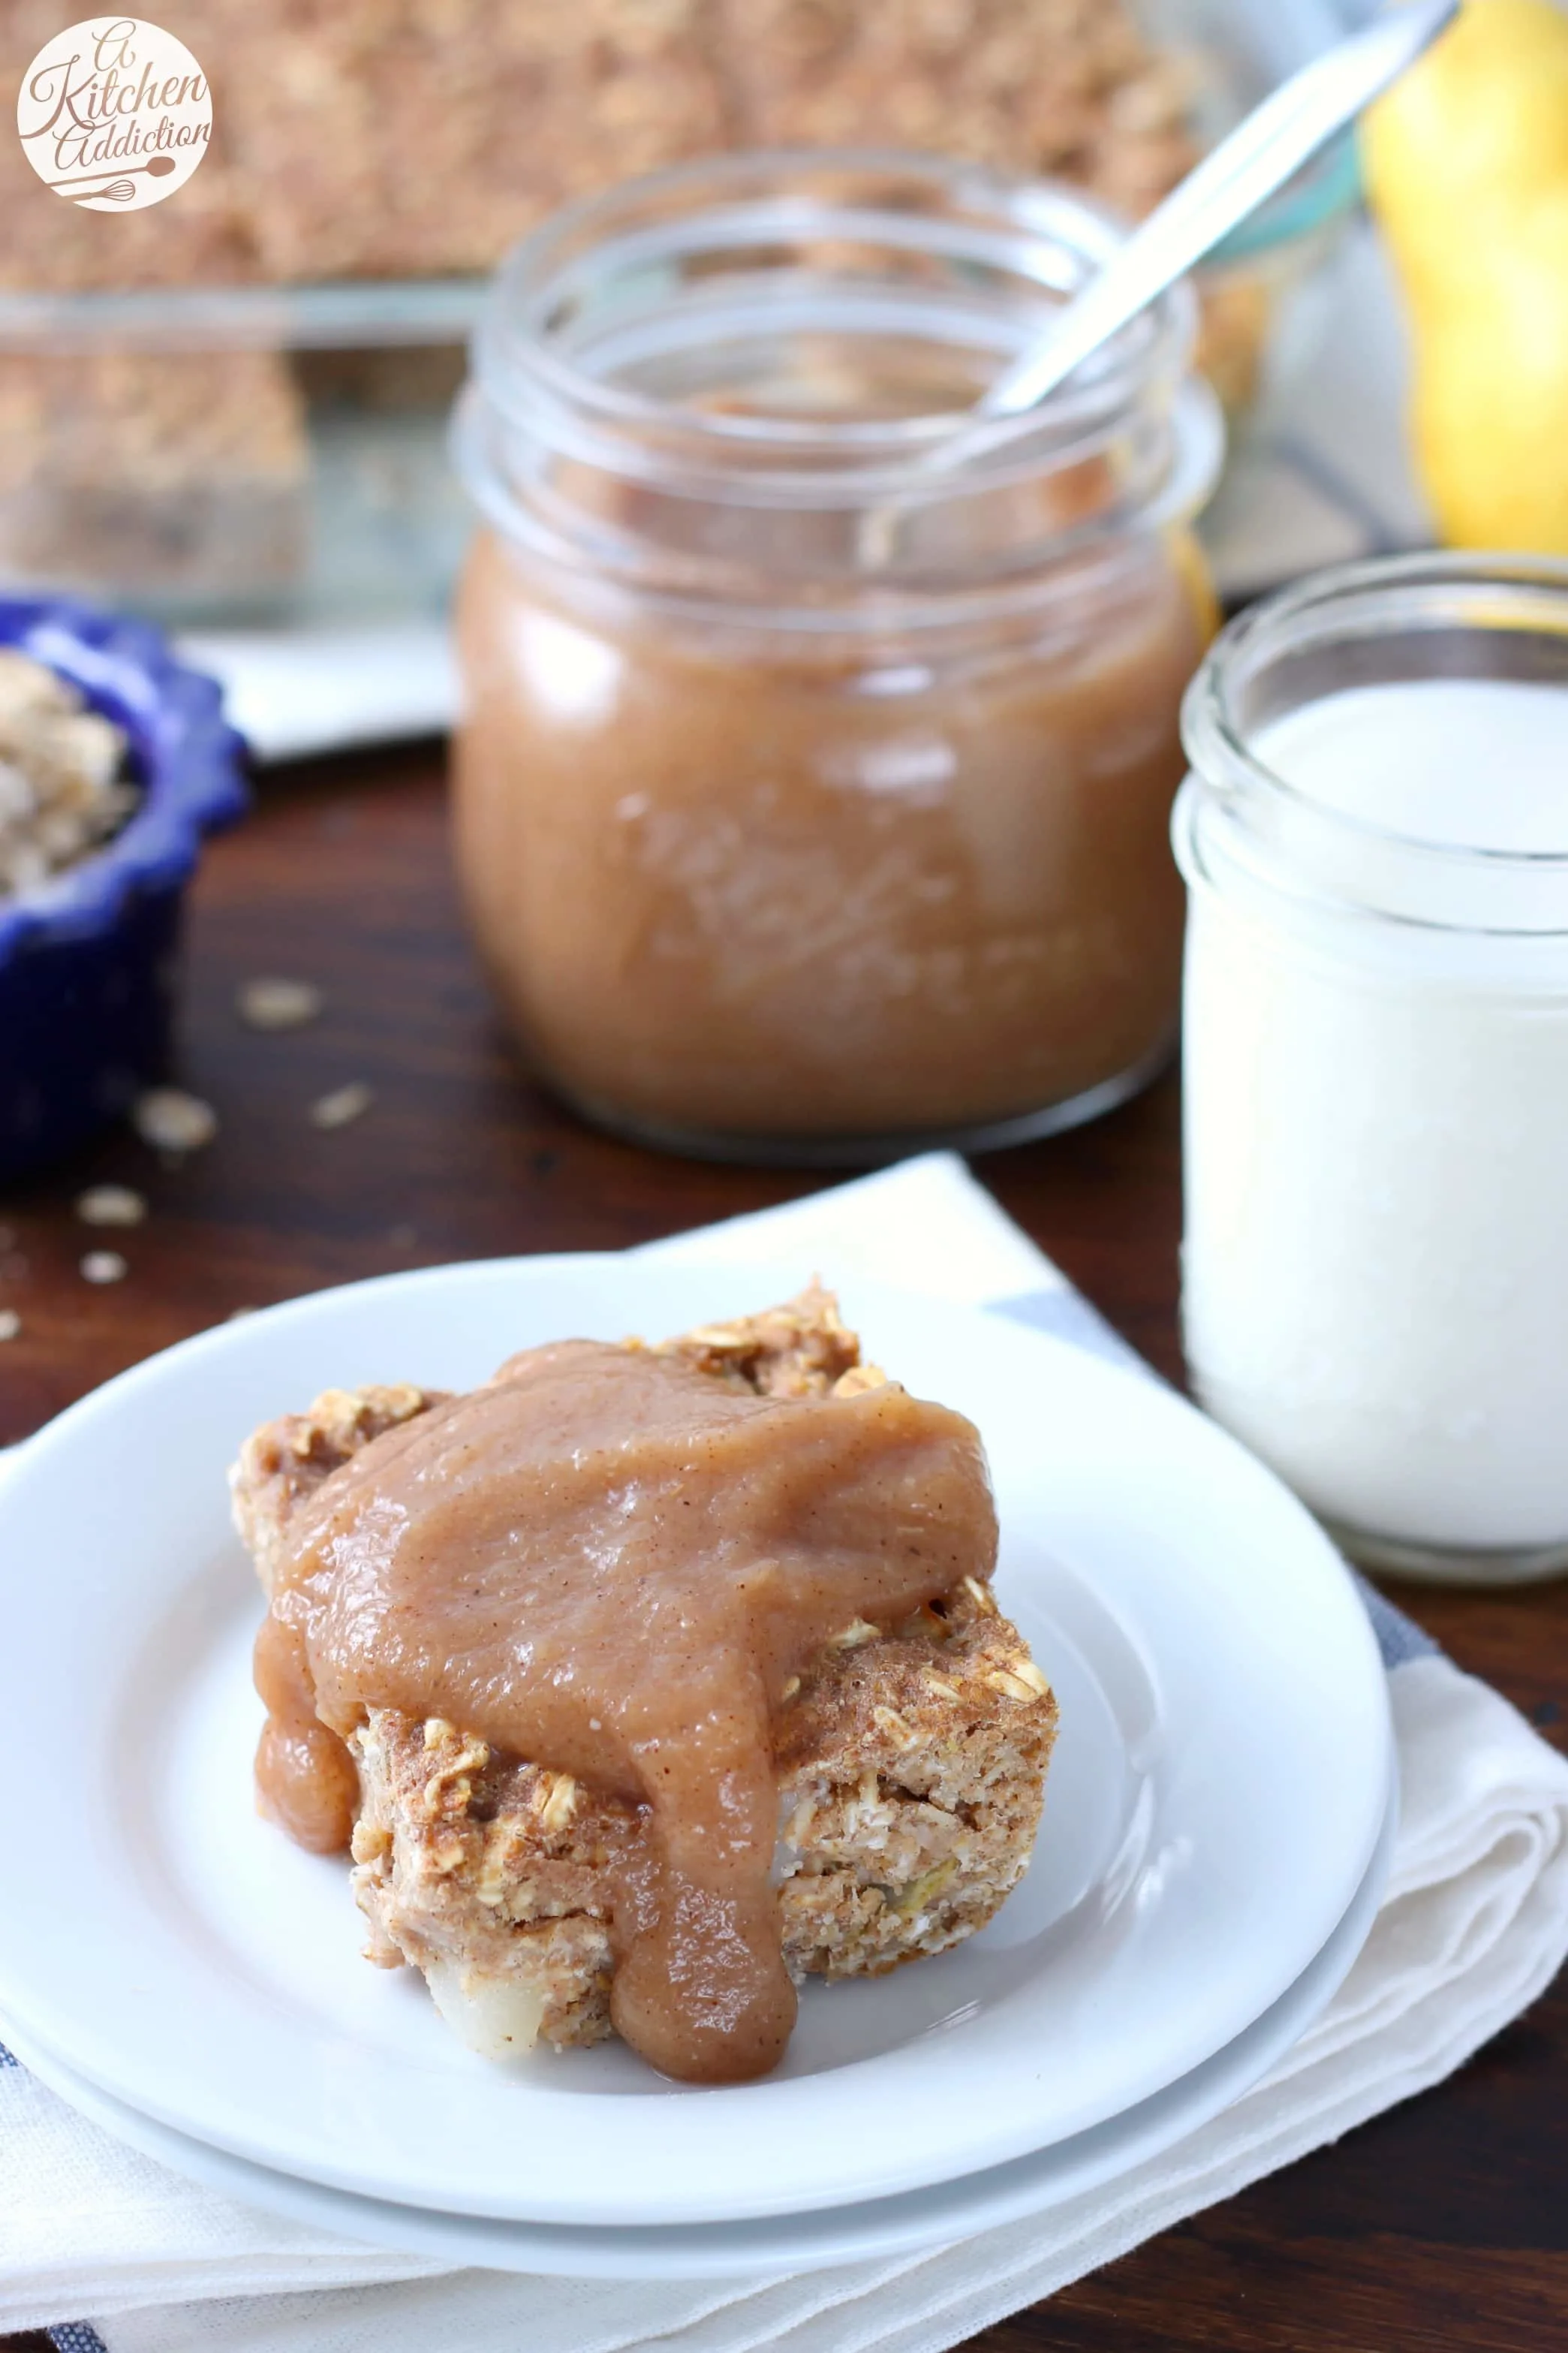 Spiced Vanilla Pear Butter Baked Oatmeal from A Kitchen Addiction